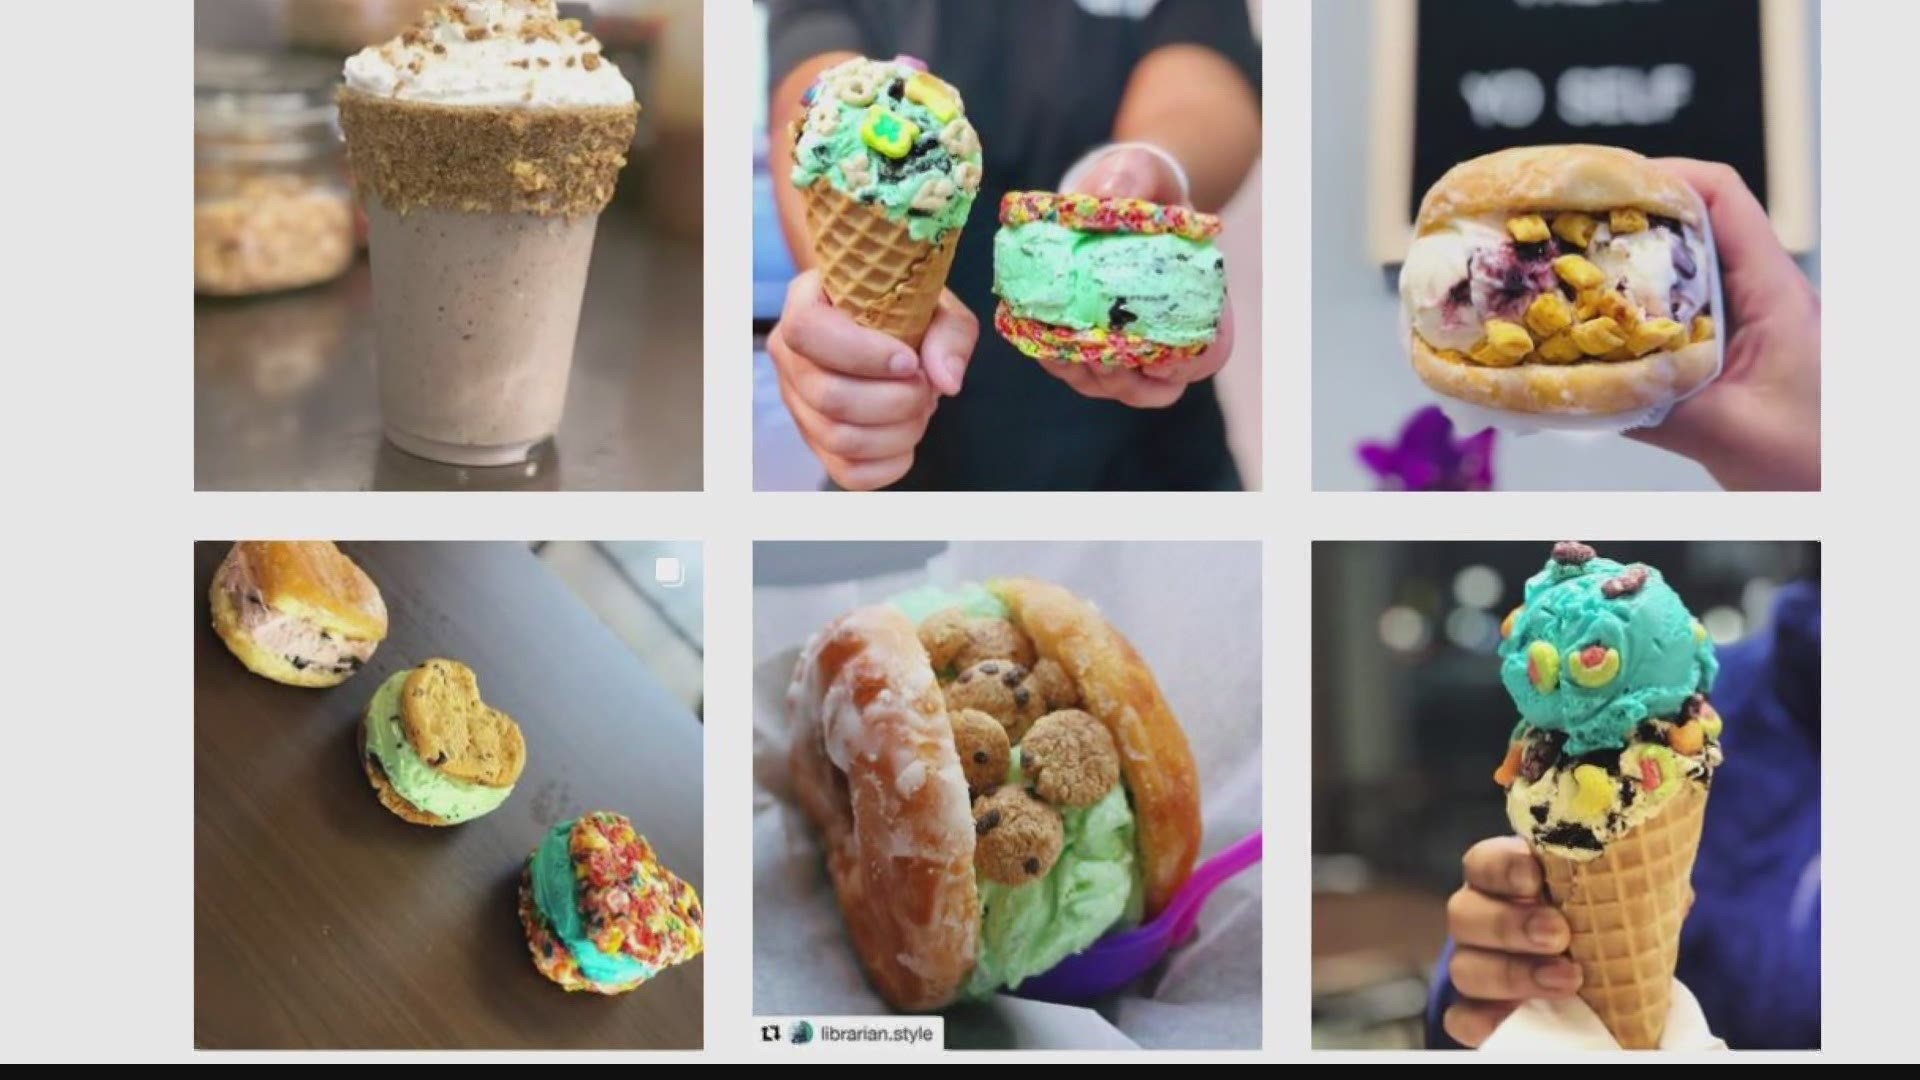 Let's talk about Insta-grammable ice cream.
It's the idea behind a local ice cream shop that's quickly growing in popularity.